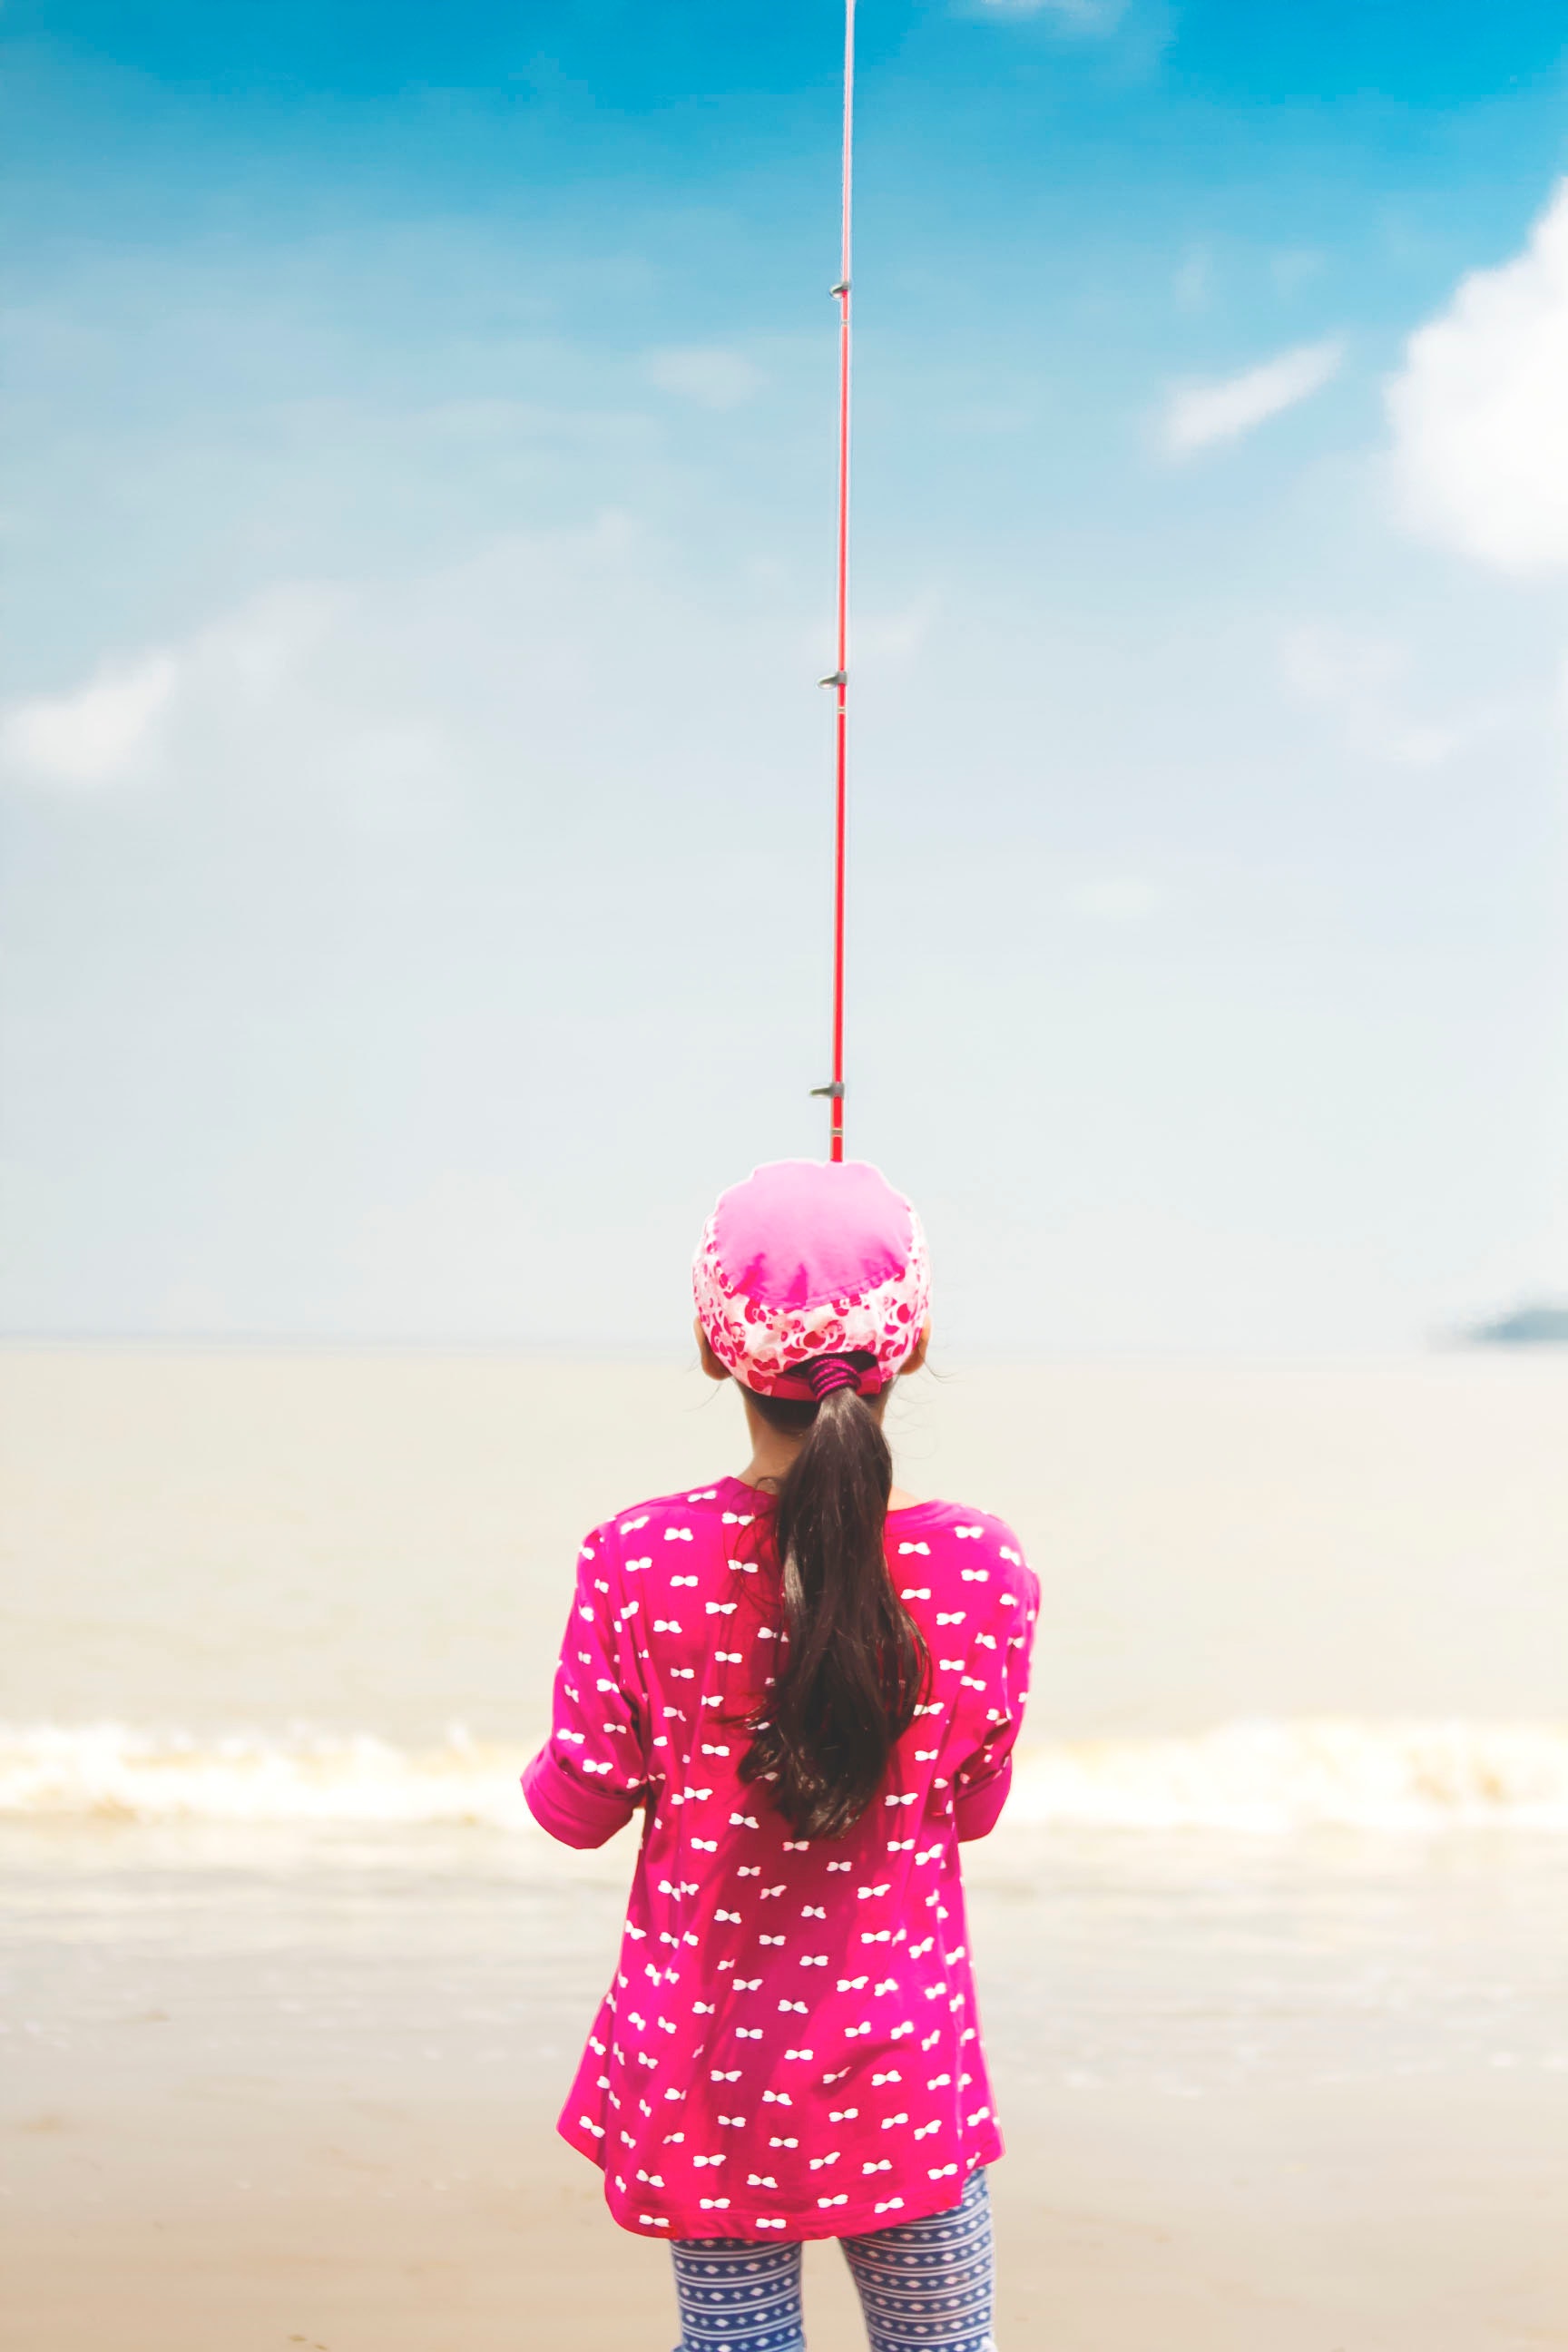 Woman in pink long-sleeved shirt holding red fishing rod photo